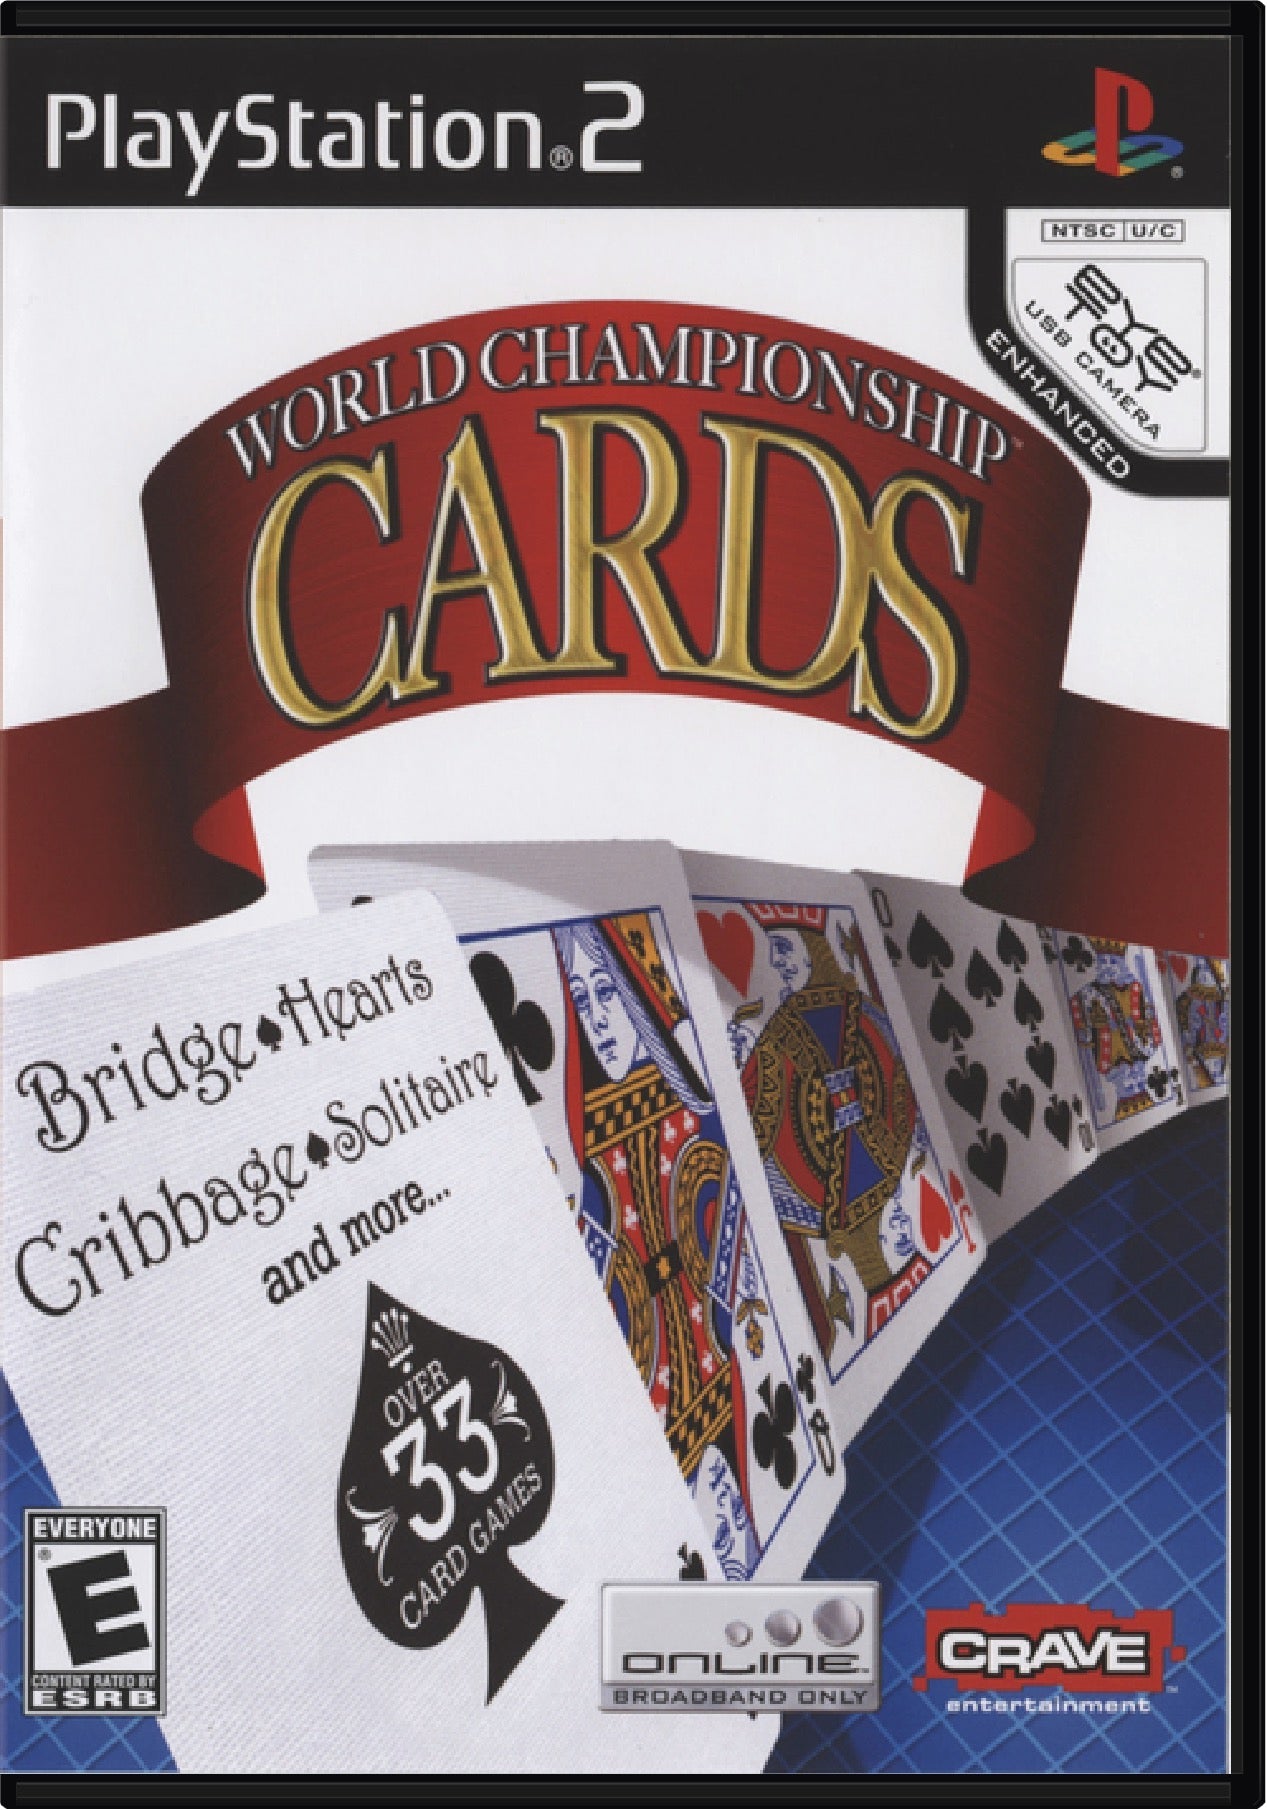 World Championship Cards Cover Art and Product Photo